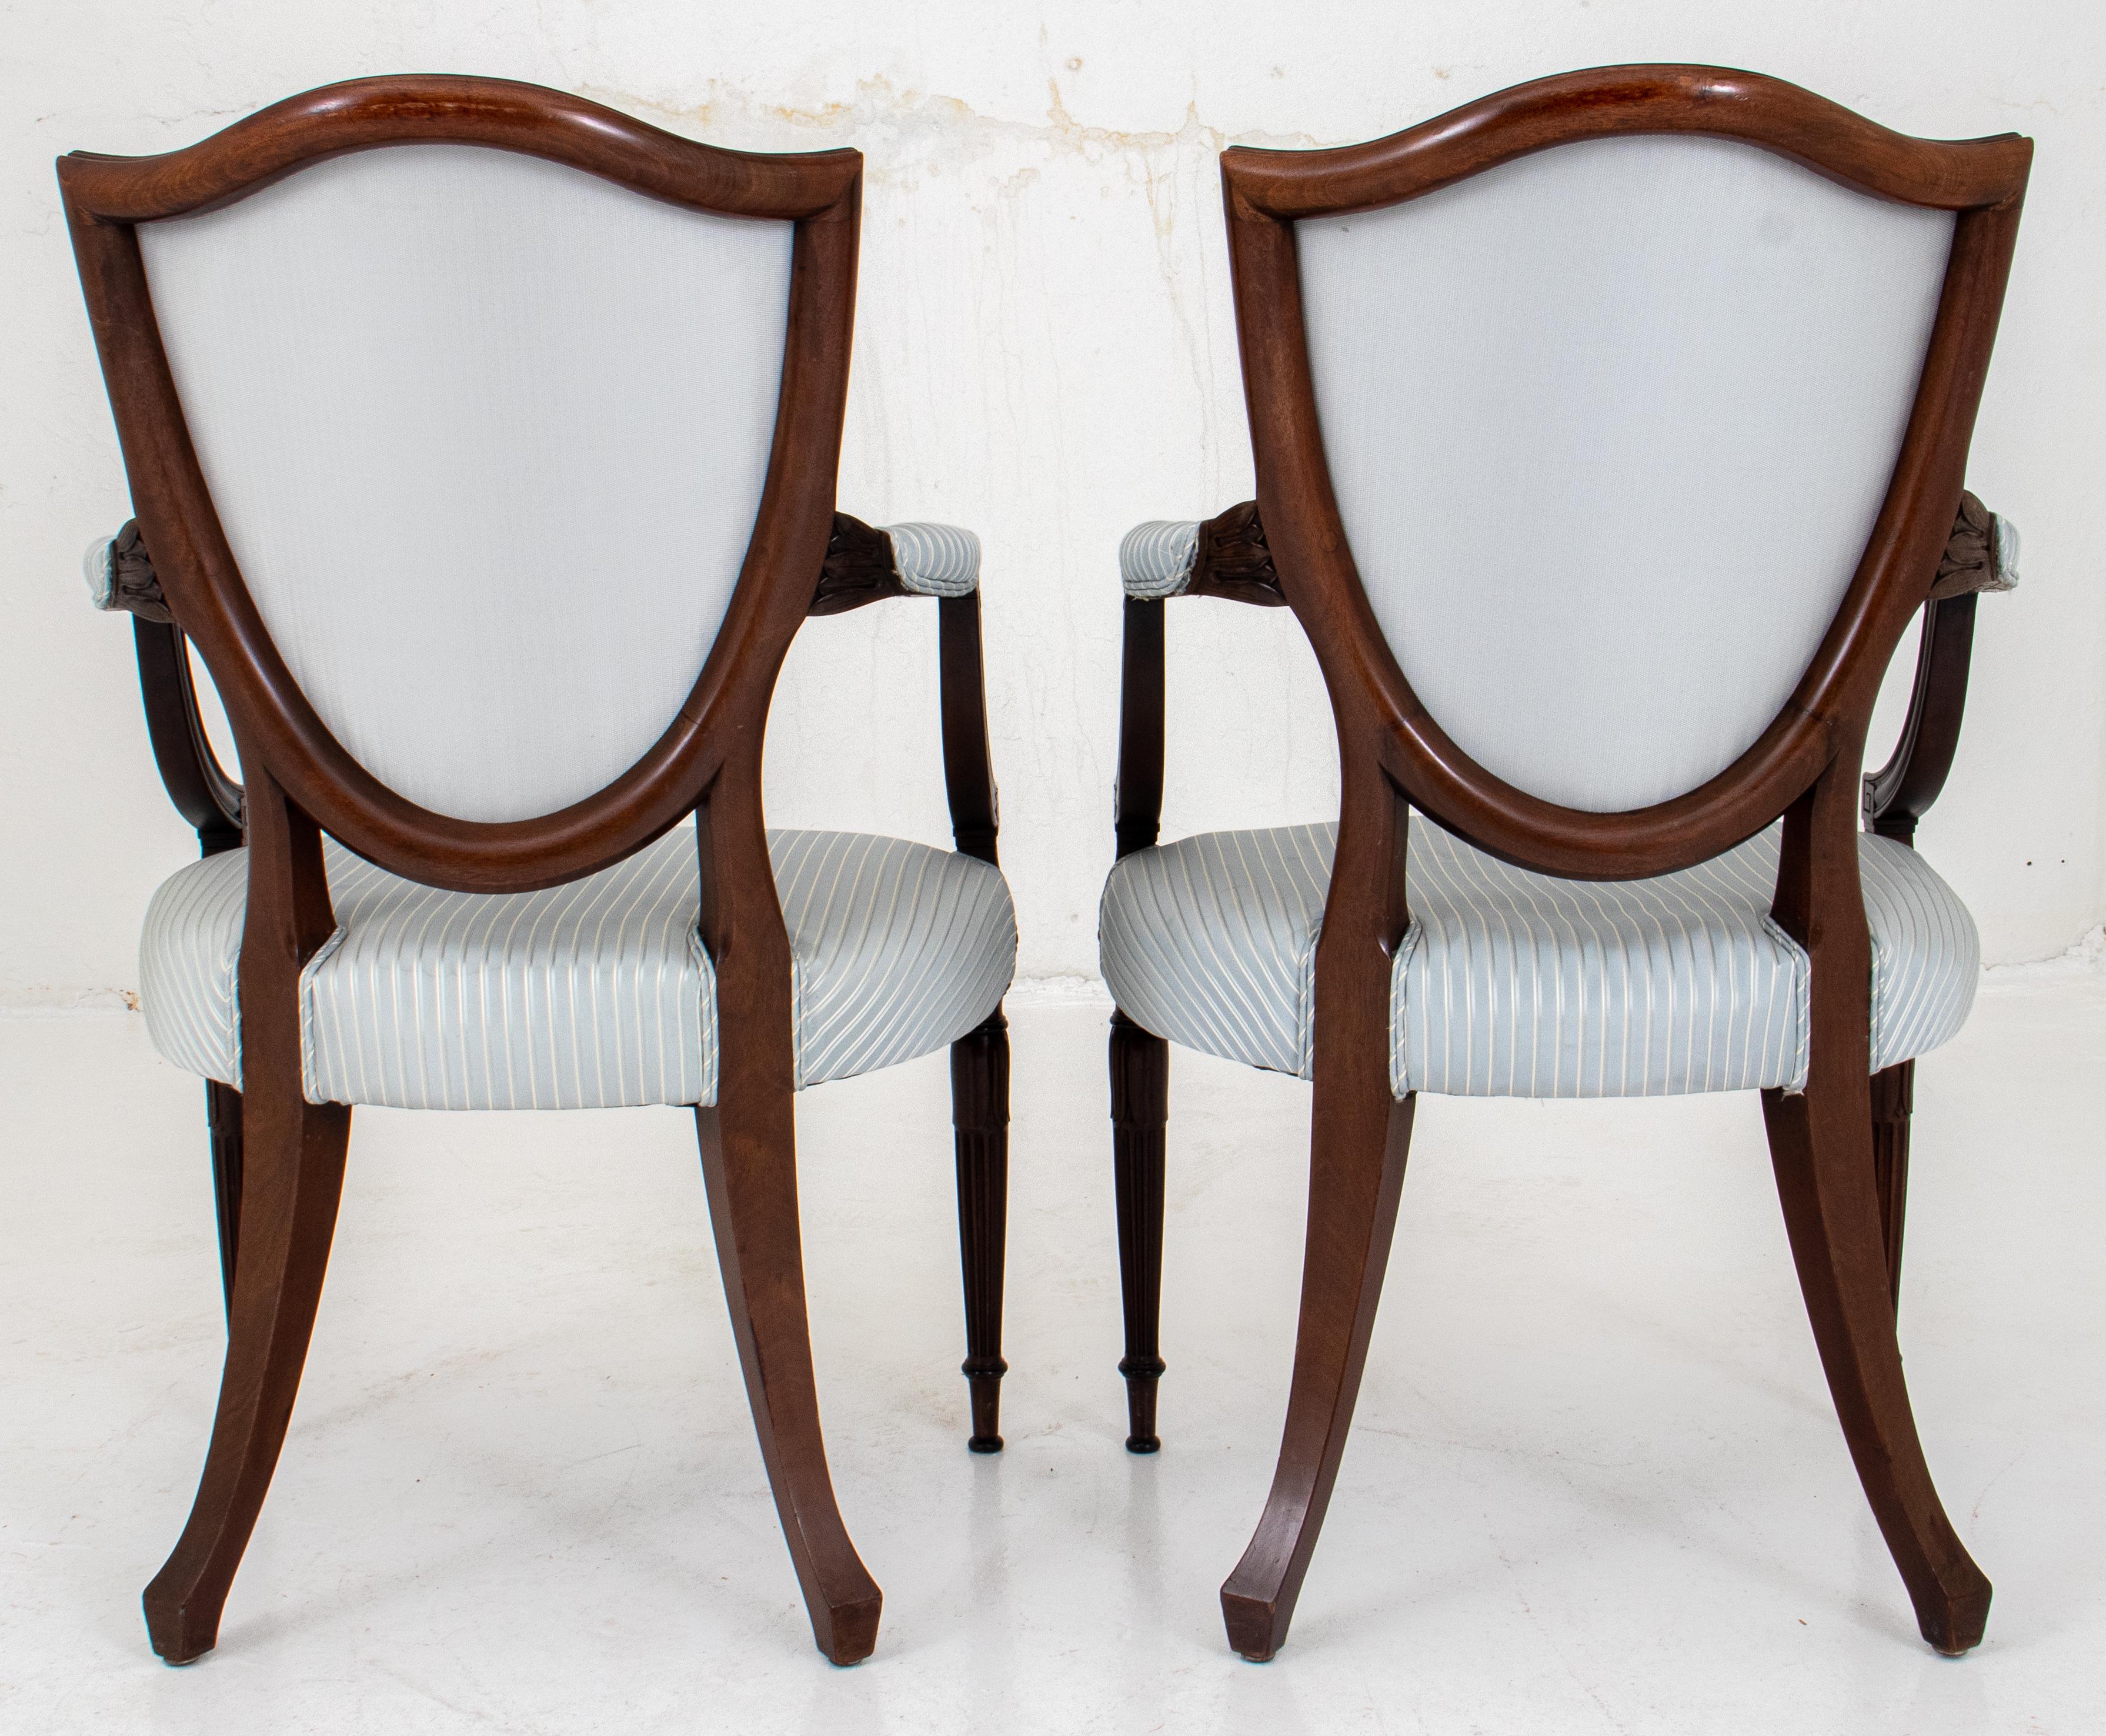 George III Sheraton Manner Shield-Back Dining Chairs, 14